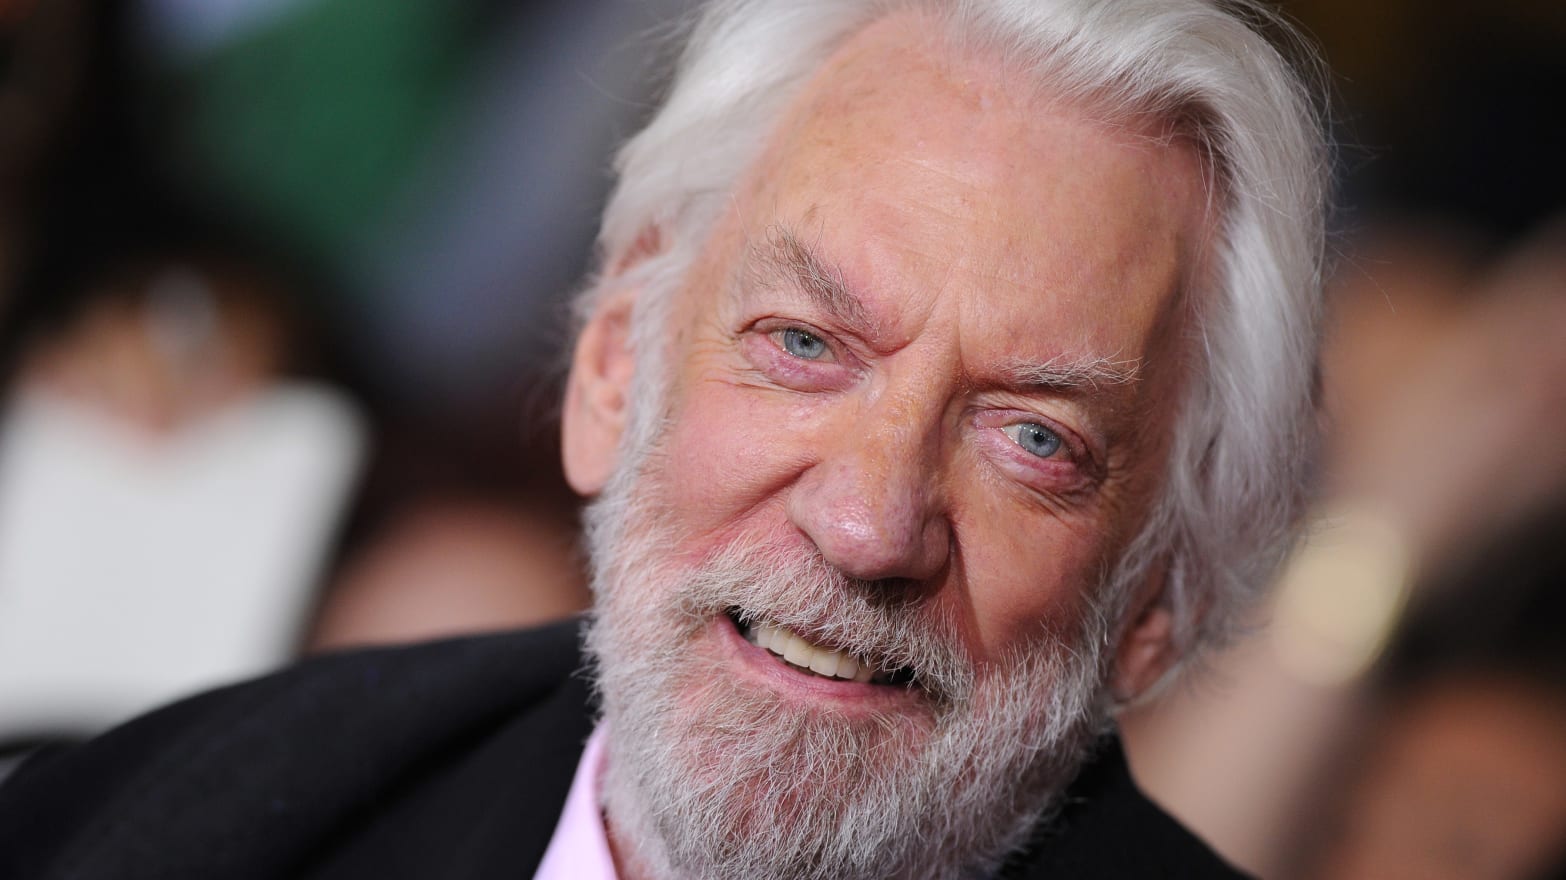 Actor Donald Sutherland arrives at the Los Angeles Premiere of 'The Hunger Games: Catching Fire' at Nokia Theatre L.A. Live on Nov. 18, 2013, in Los Angeles, California.